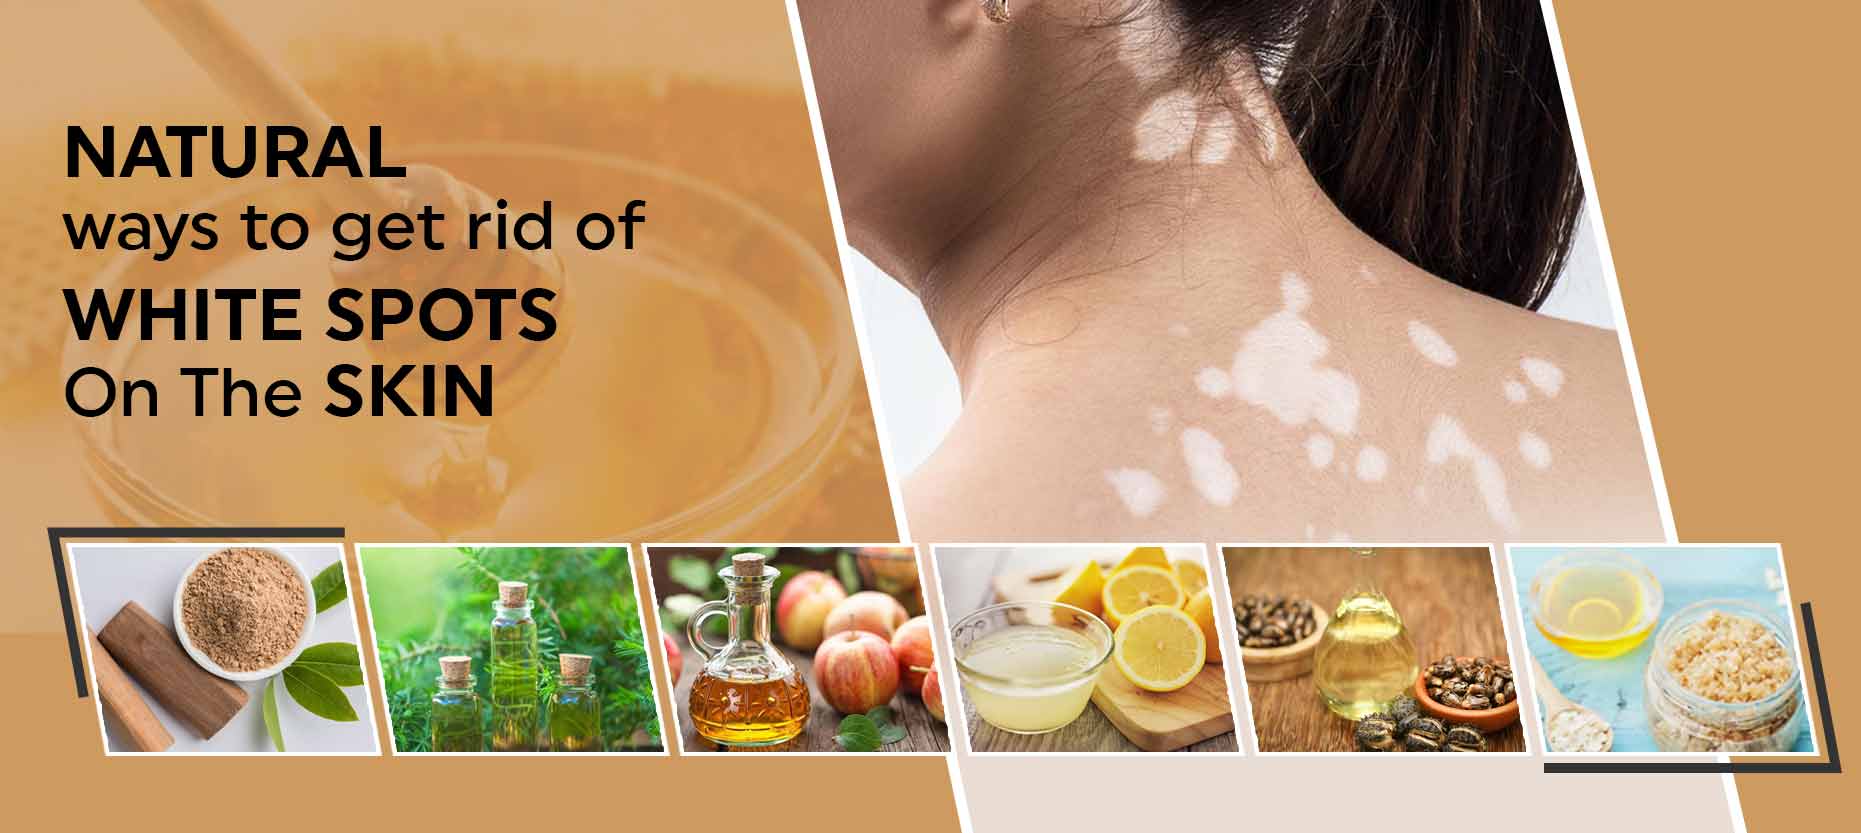 Natural Ways To Get Rid Of White Spots On Skin